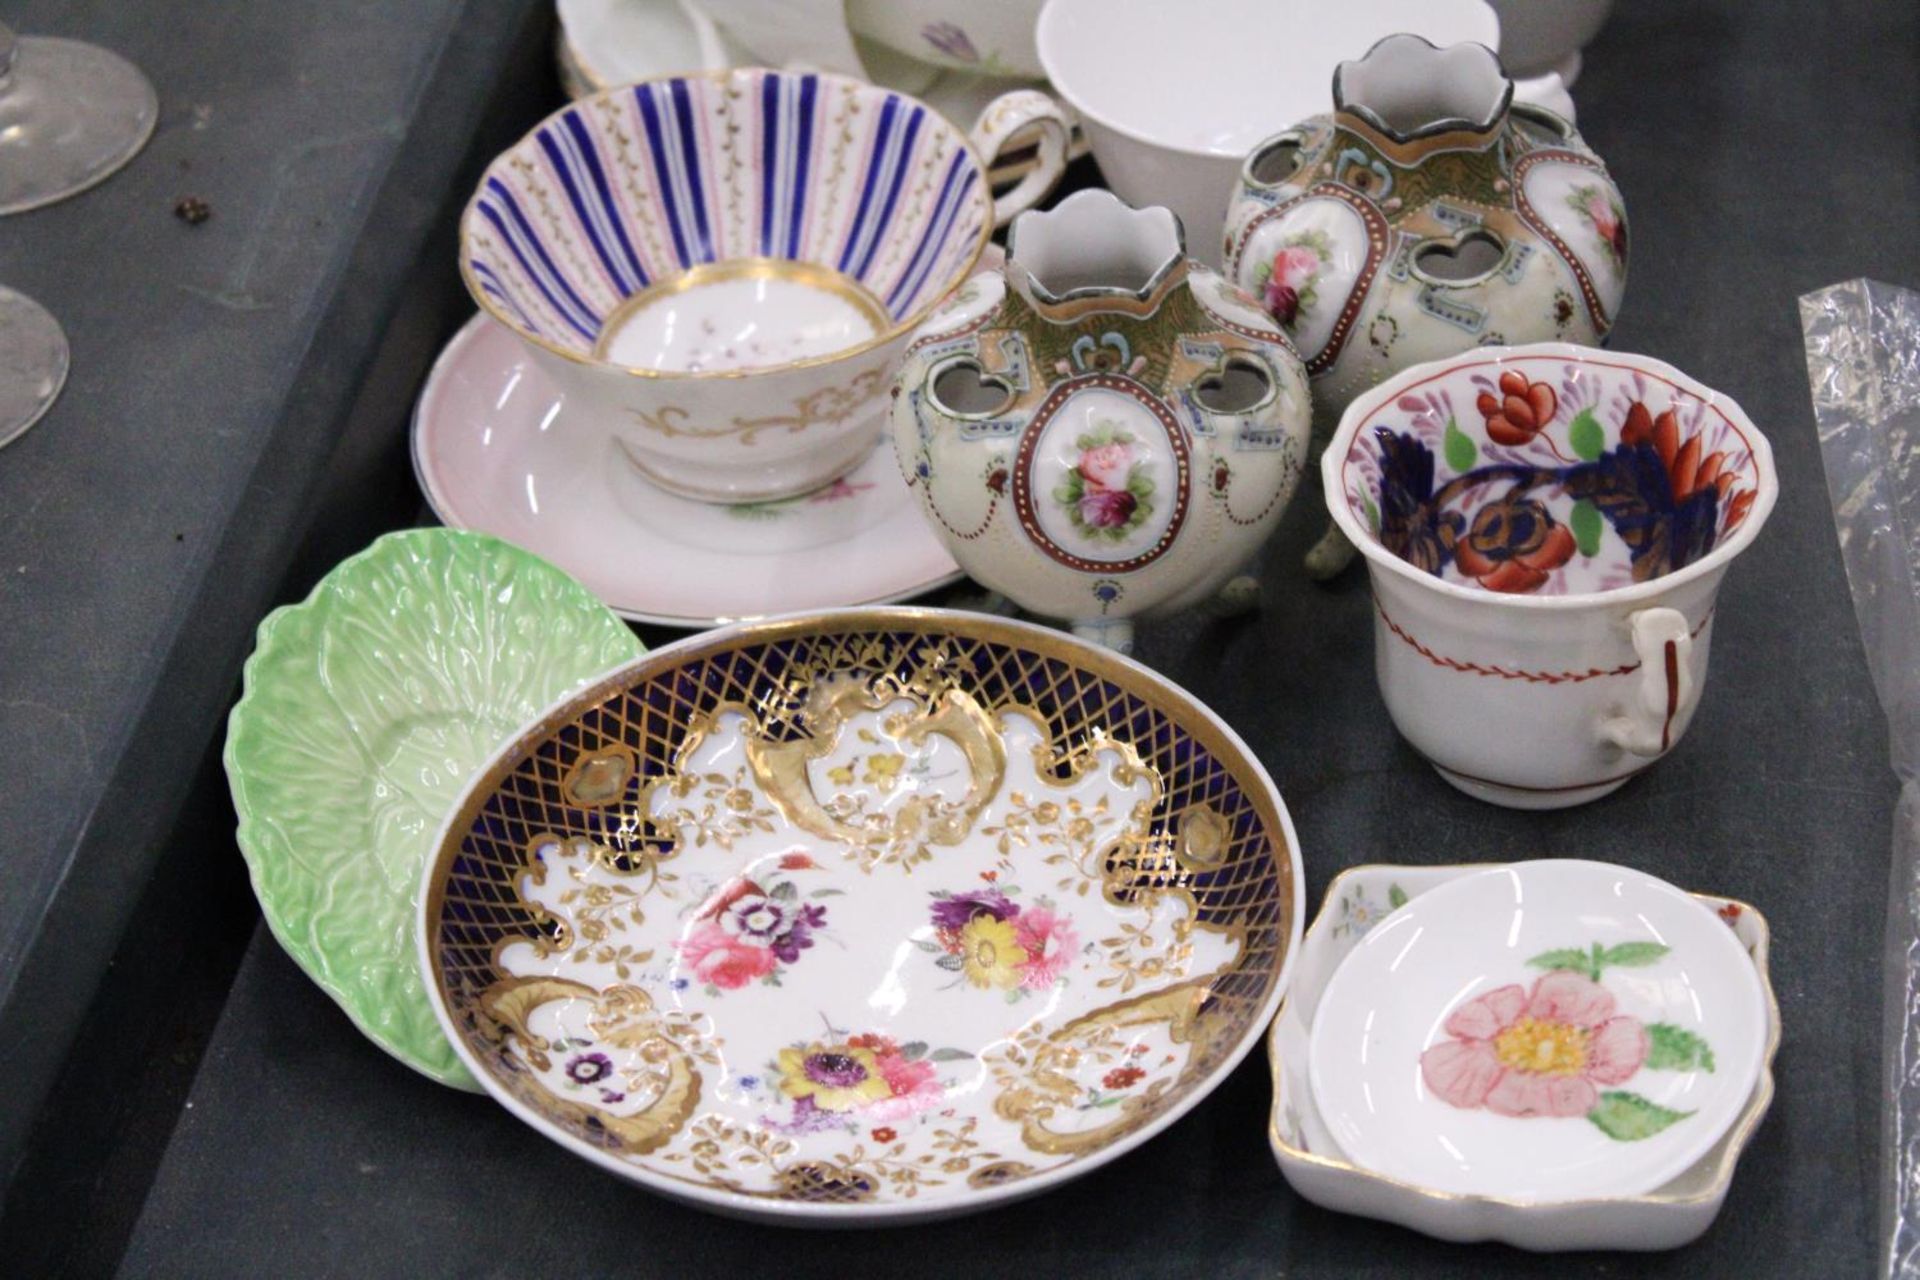 A FOLEY CHINA PART TEASET TO INCLUDE A CAKE PLATE, A CREAM JUG, SUGAR BOWL, CUPS, SAUCERS AND SIDE - Image 3 of 6